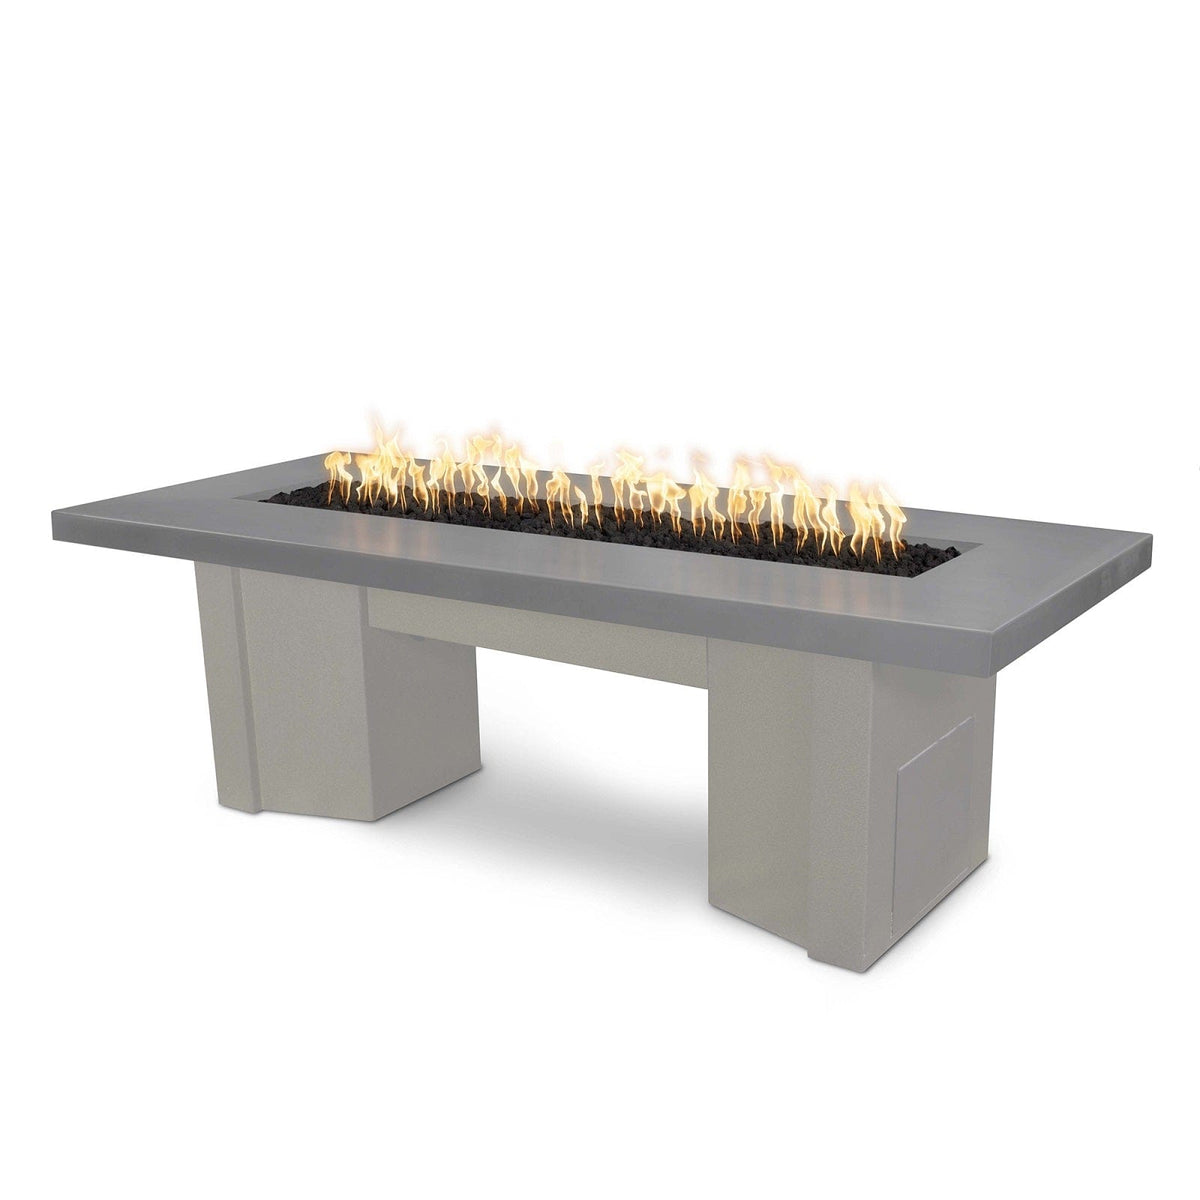 The Outdoor Plus Fire Features Natural Gray (-NGY) / Pewter Powder Coated Steel (-PEW) The Outdoor Plus 78&quot; Alameda Fire Table Smooth Concrete in Liquid Propane - Flame Sense System with Push Button Spark Igniter / OPT-ALMGFRC78FSEN-LP